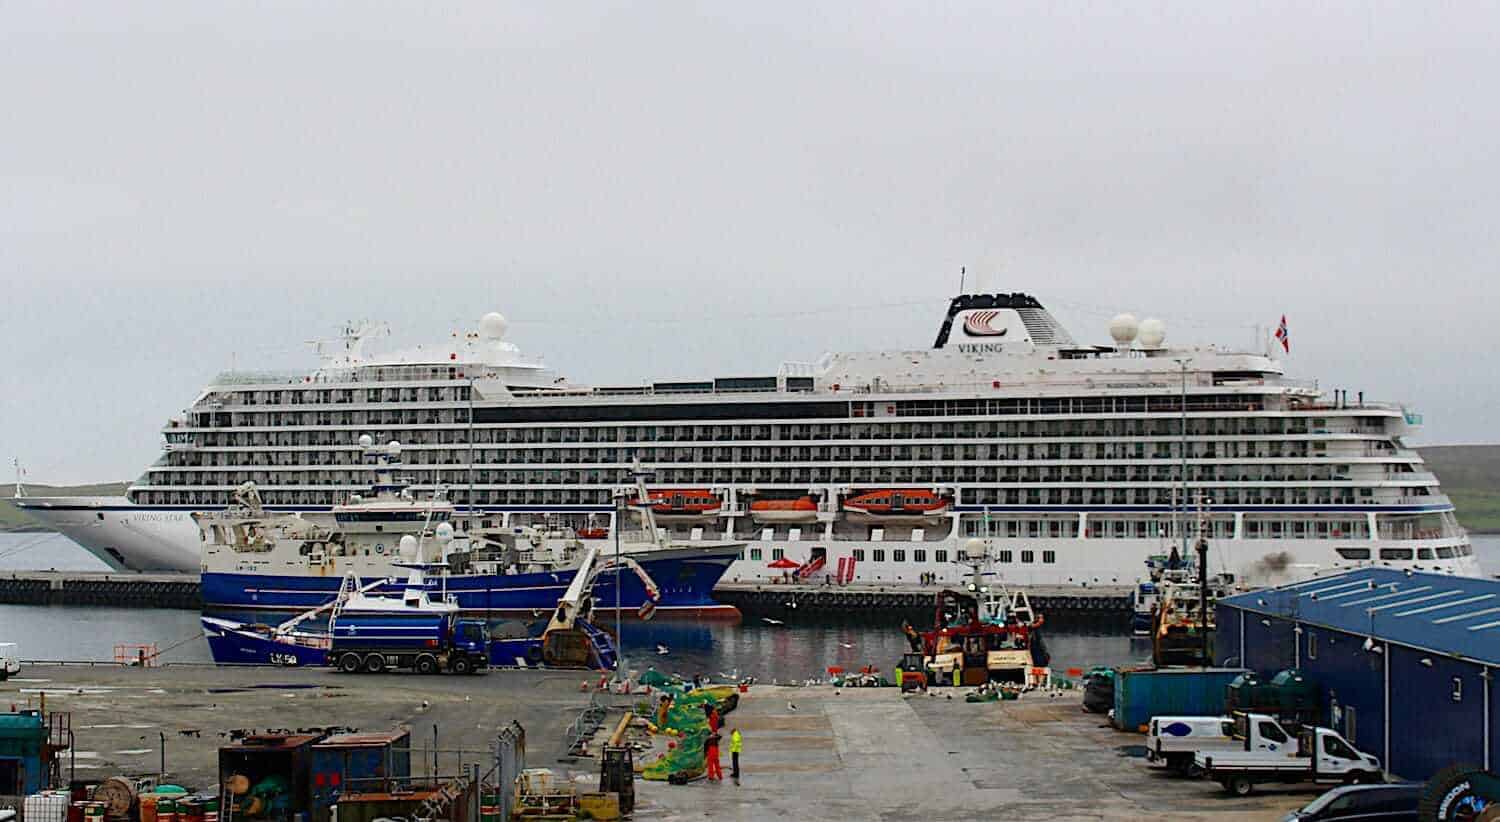 Large cruise ships dock at Lerwick...more than doubling the town's population